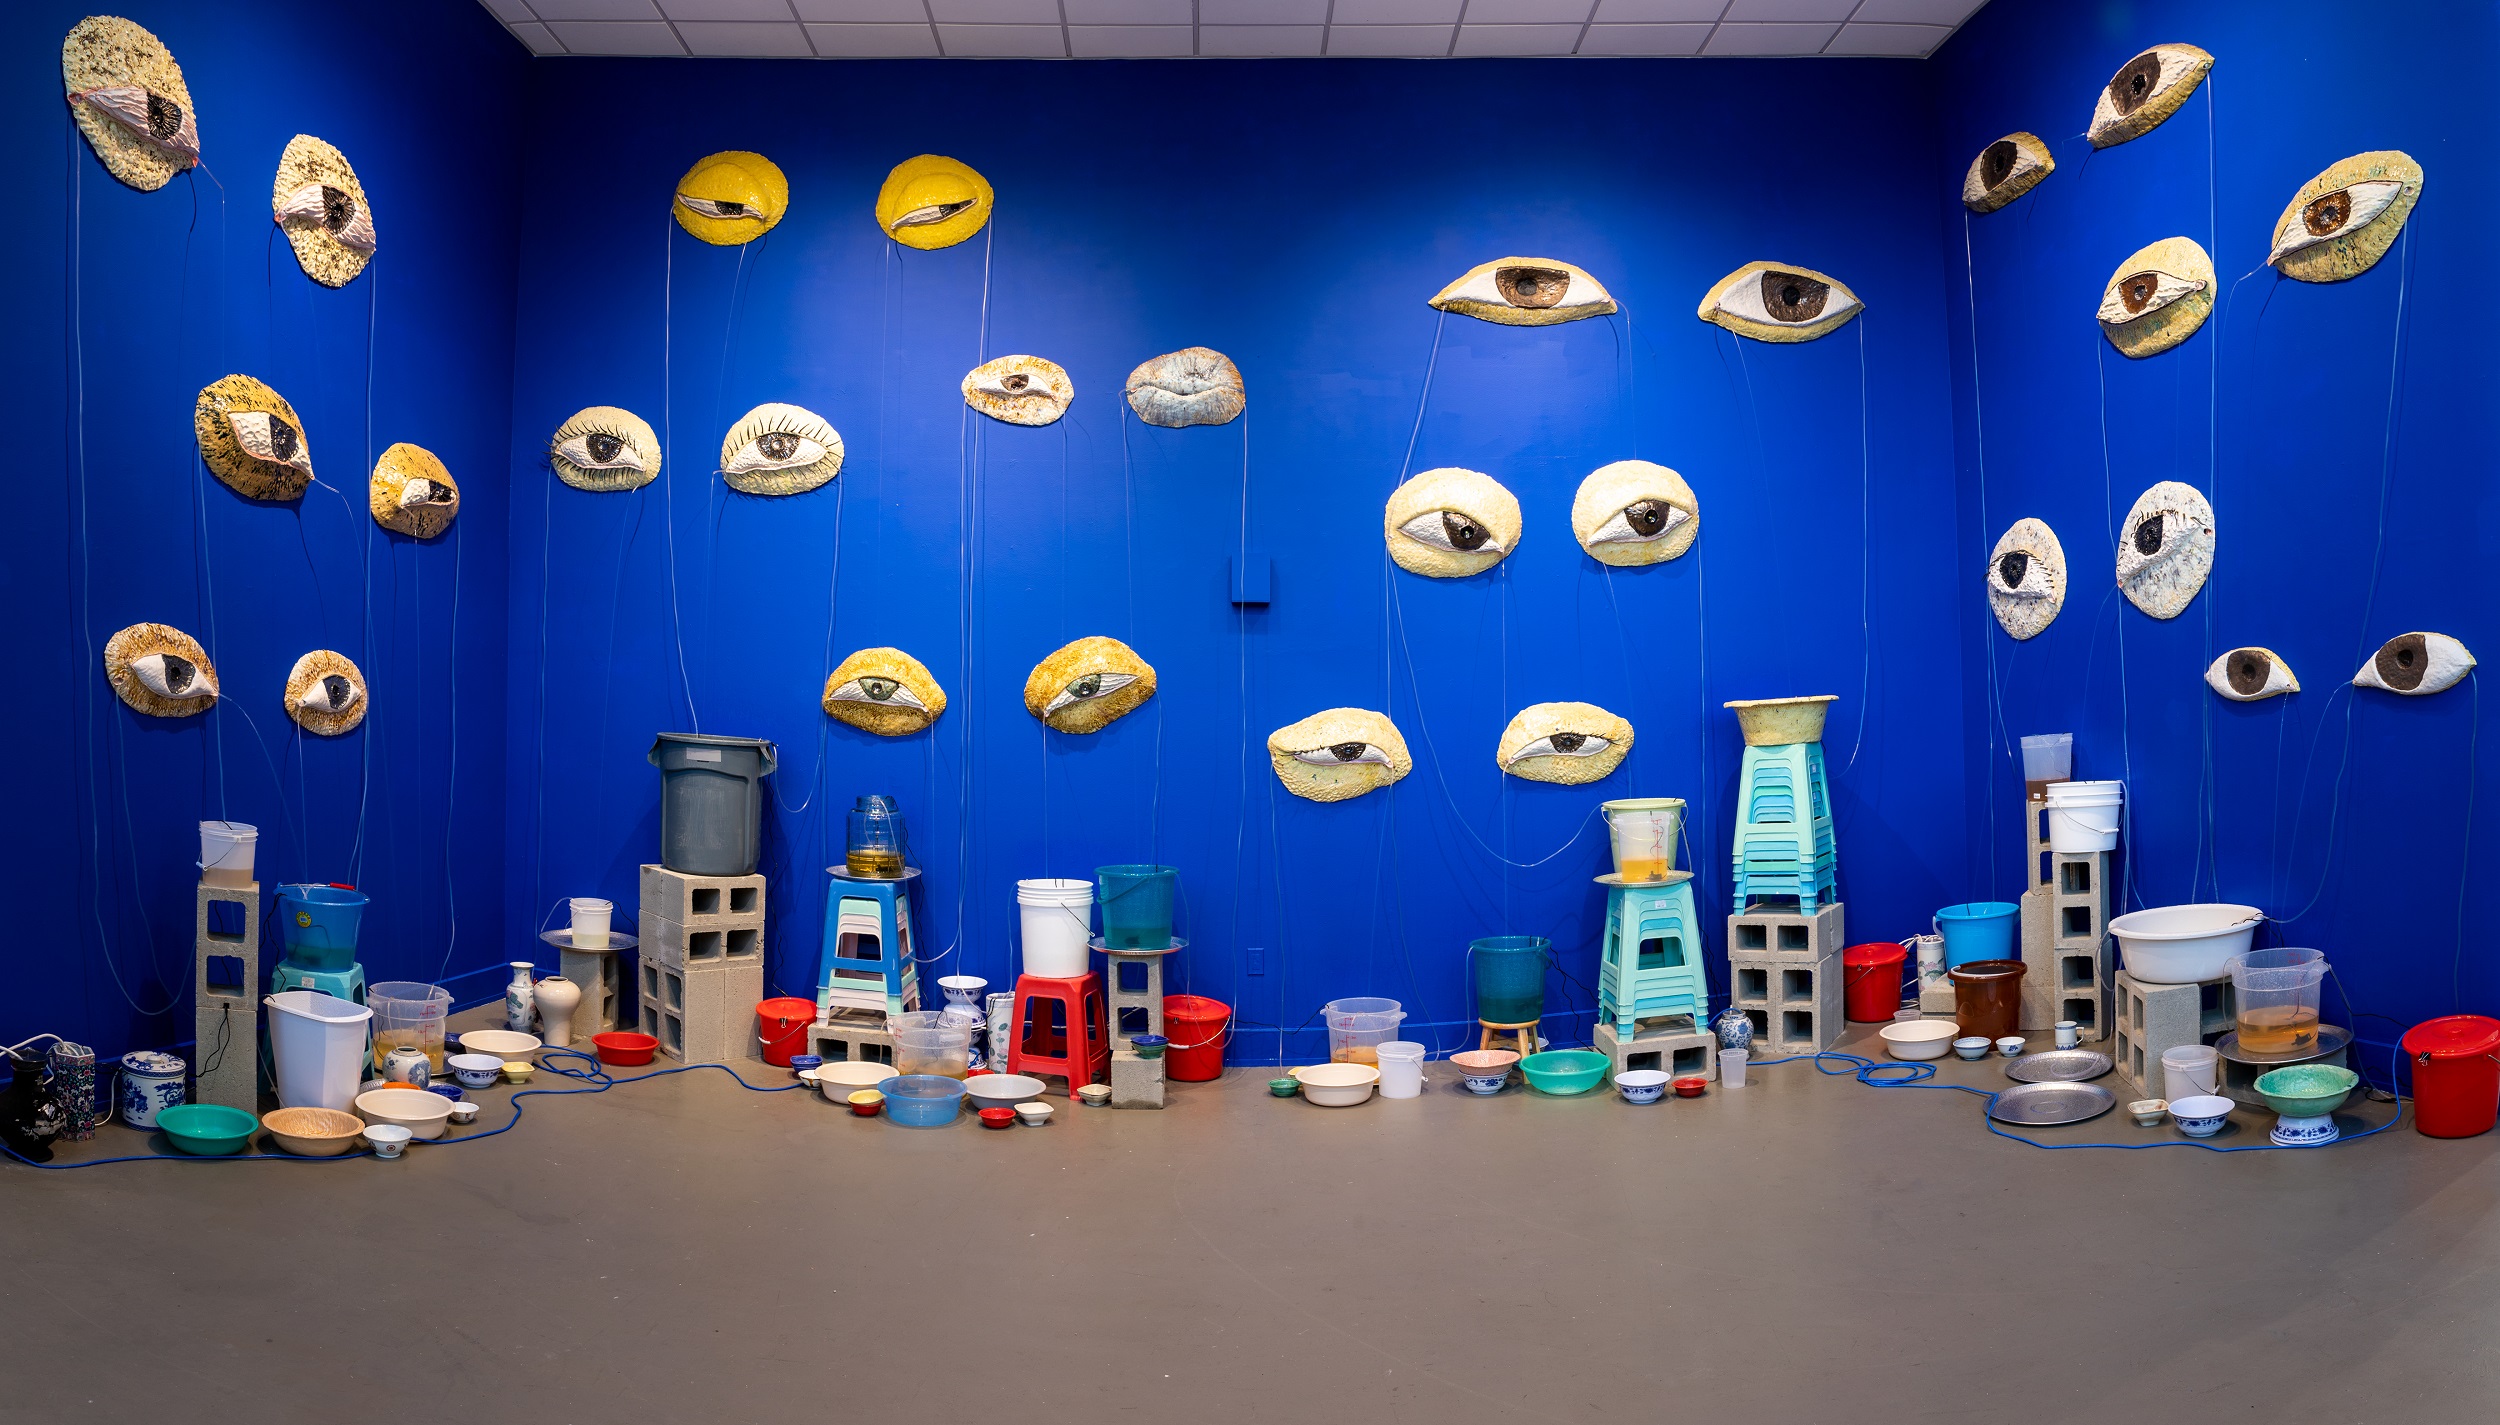 Interior view of a museum gallery with sculptural human eyes hanging on three bright blue walls. On the floor are cinder blocks and various pails, buckets, and dishes.